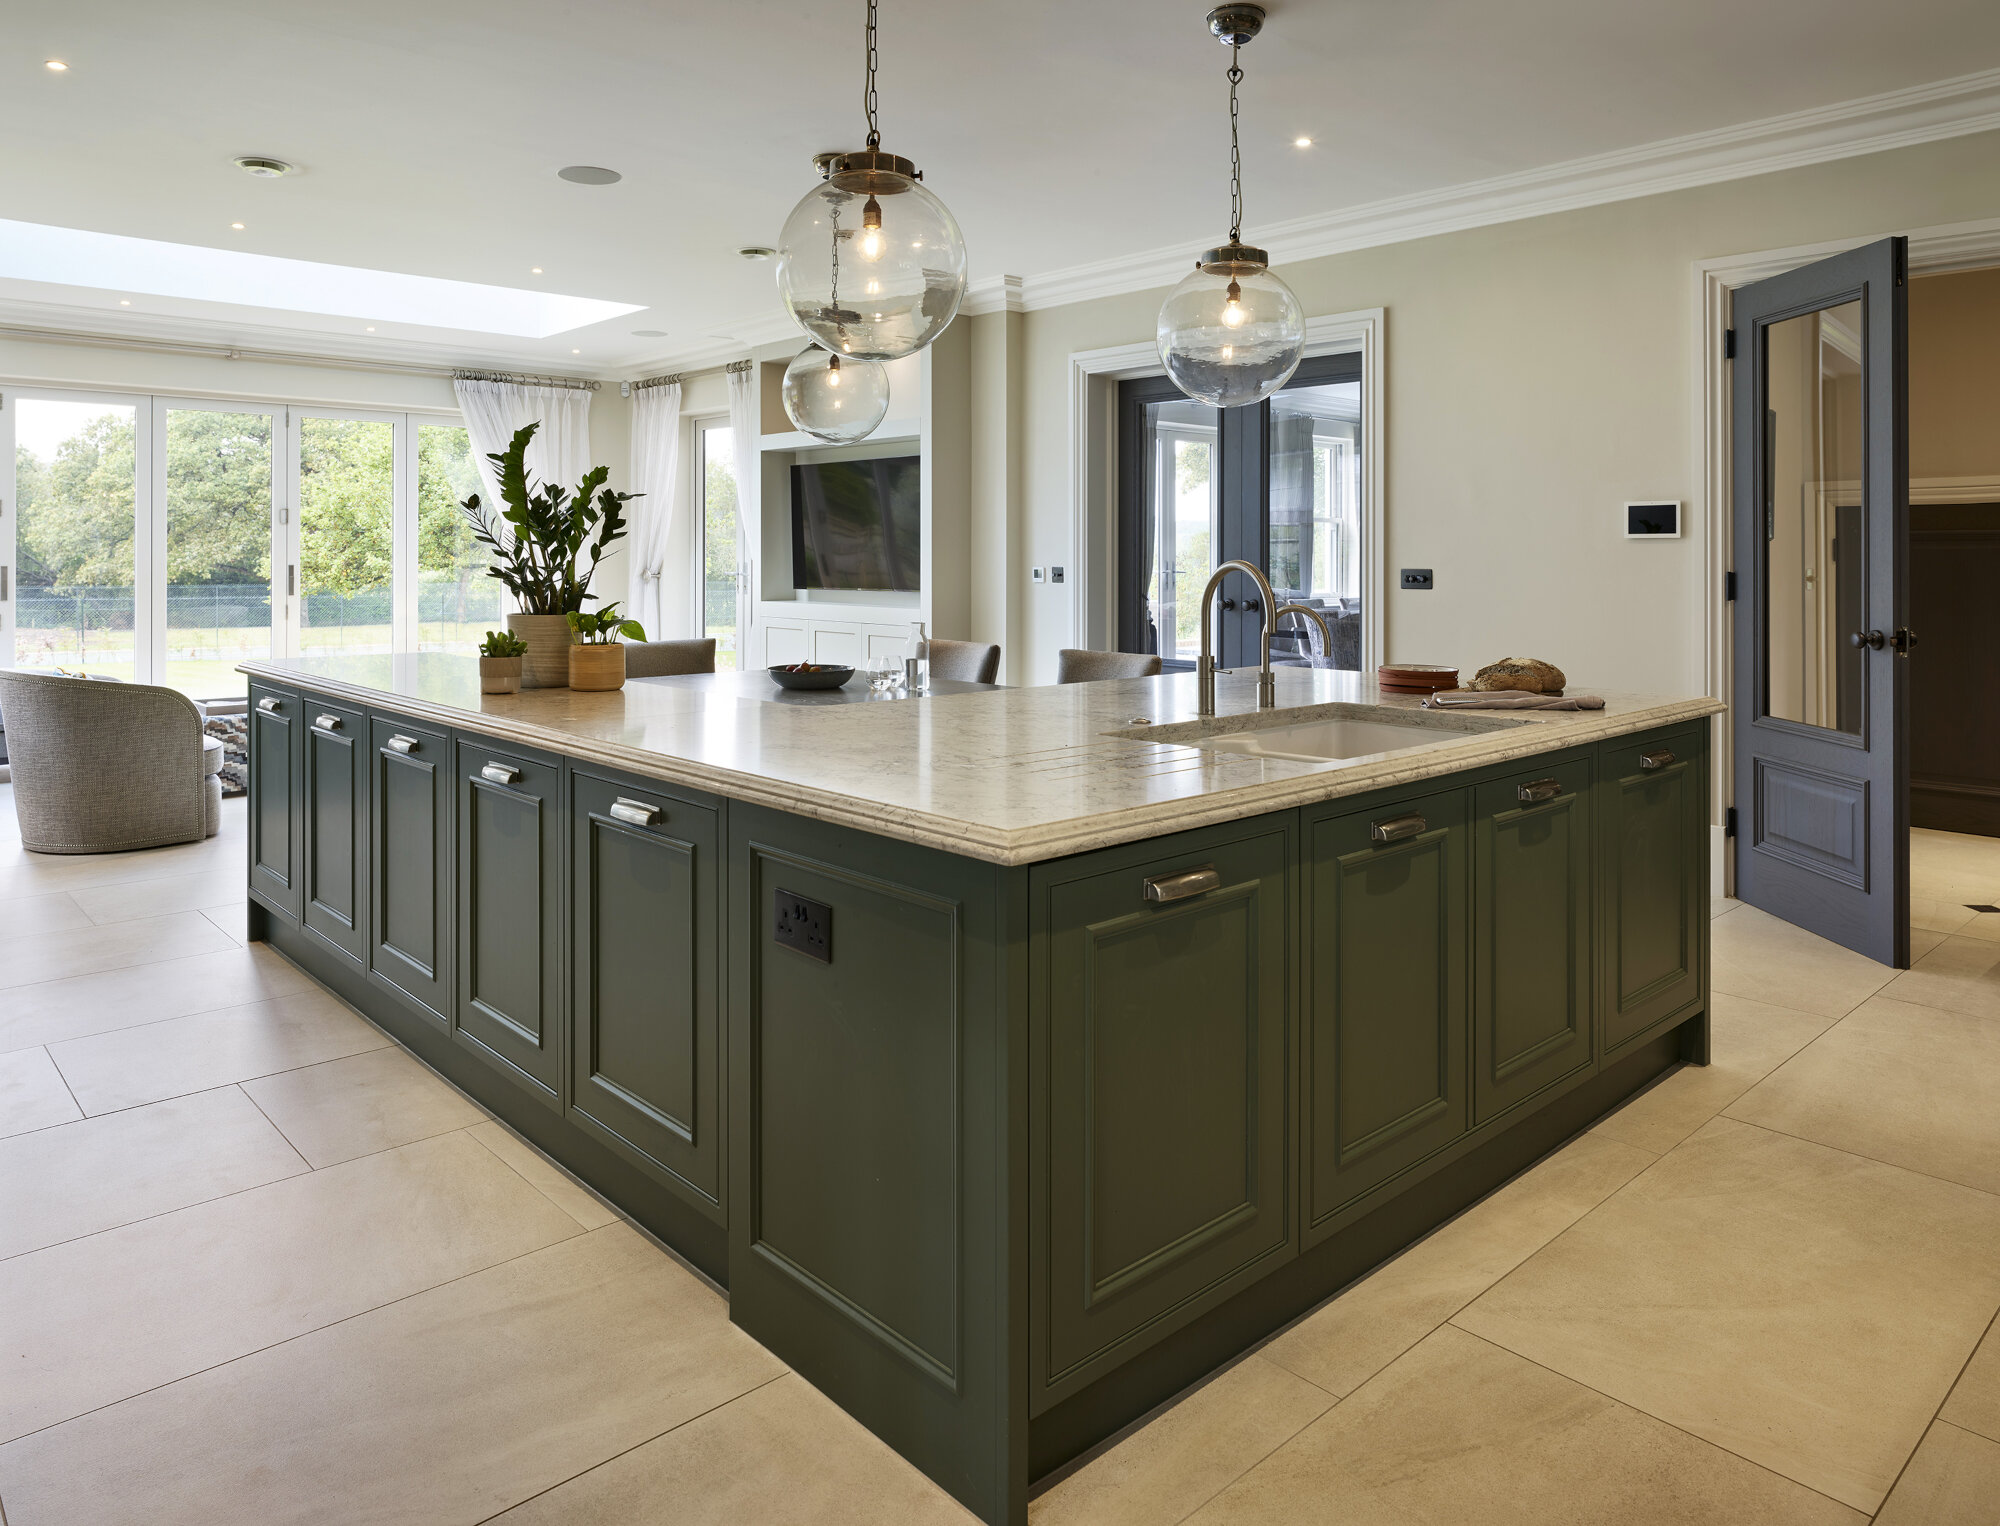 High End traditional Kitchens In Hinckley